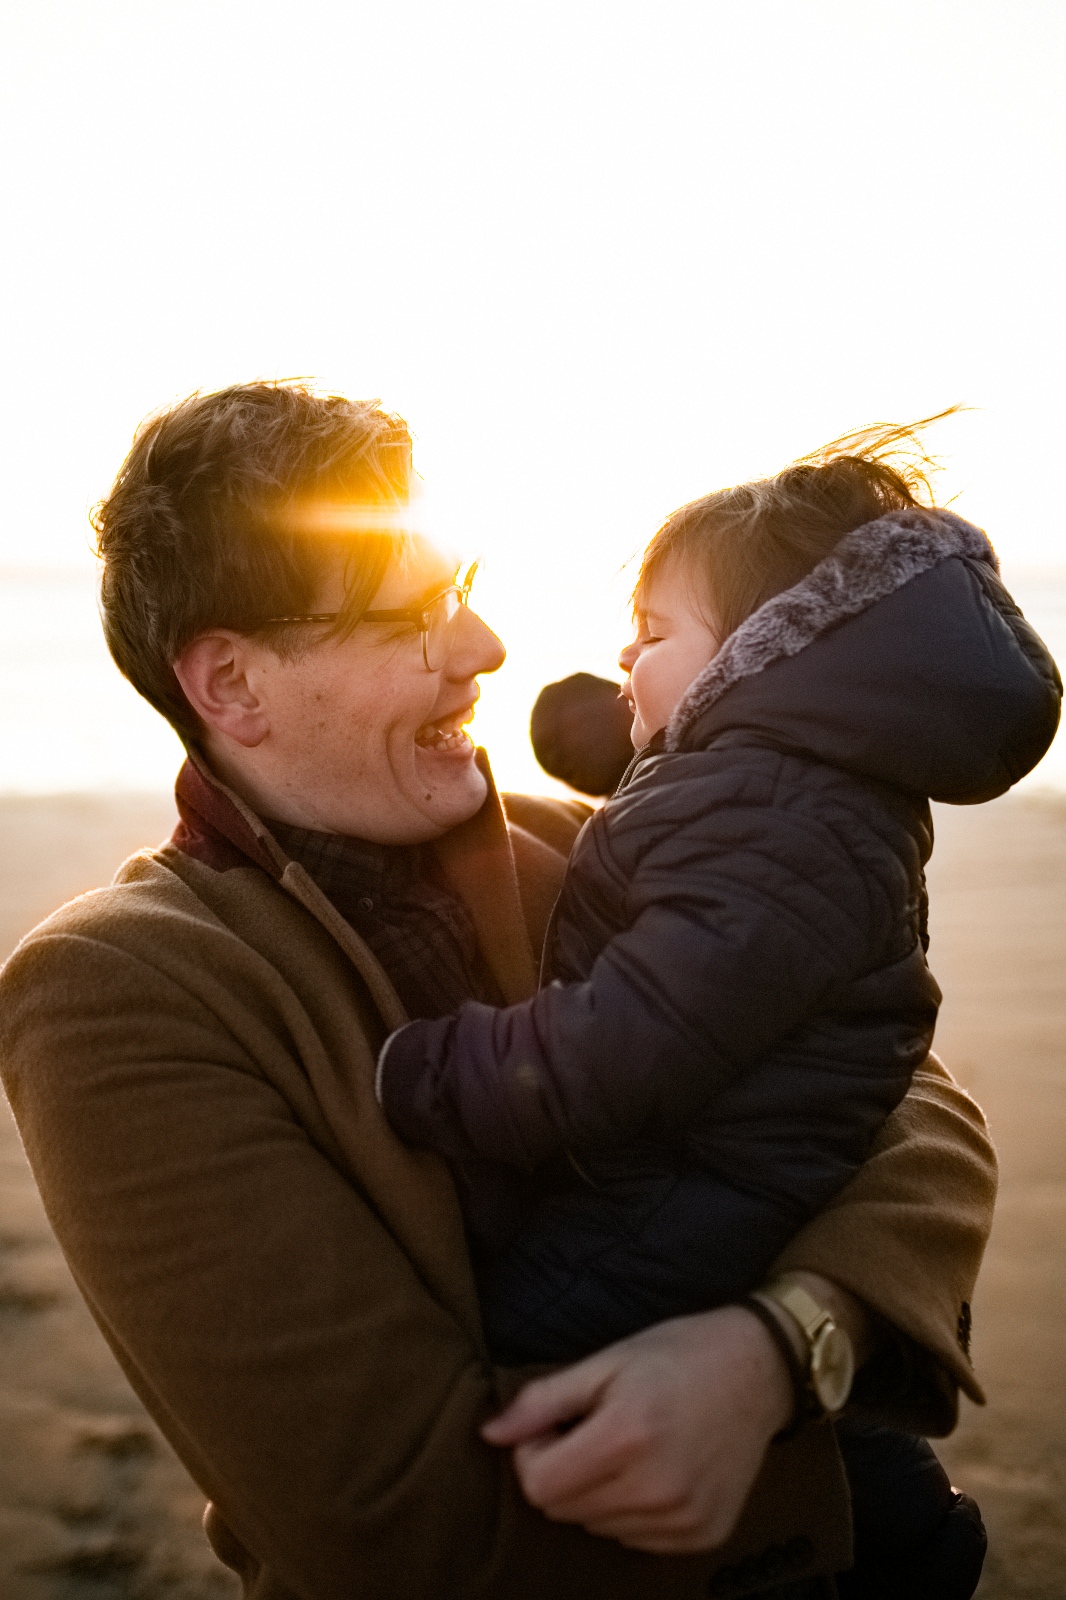 man holding young boy in sunset